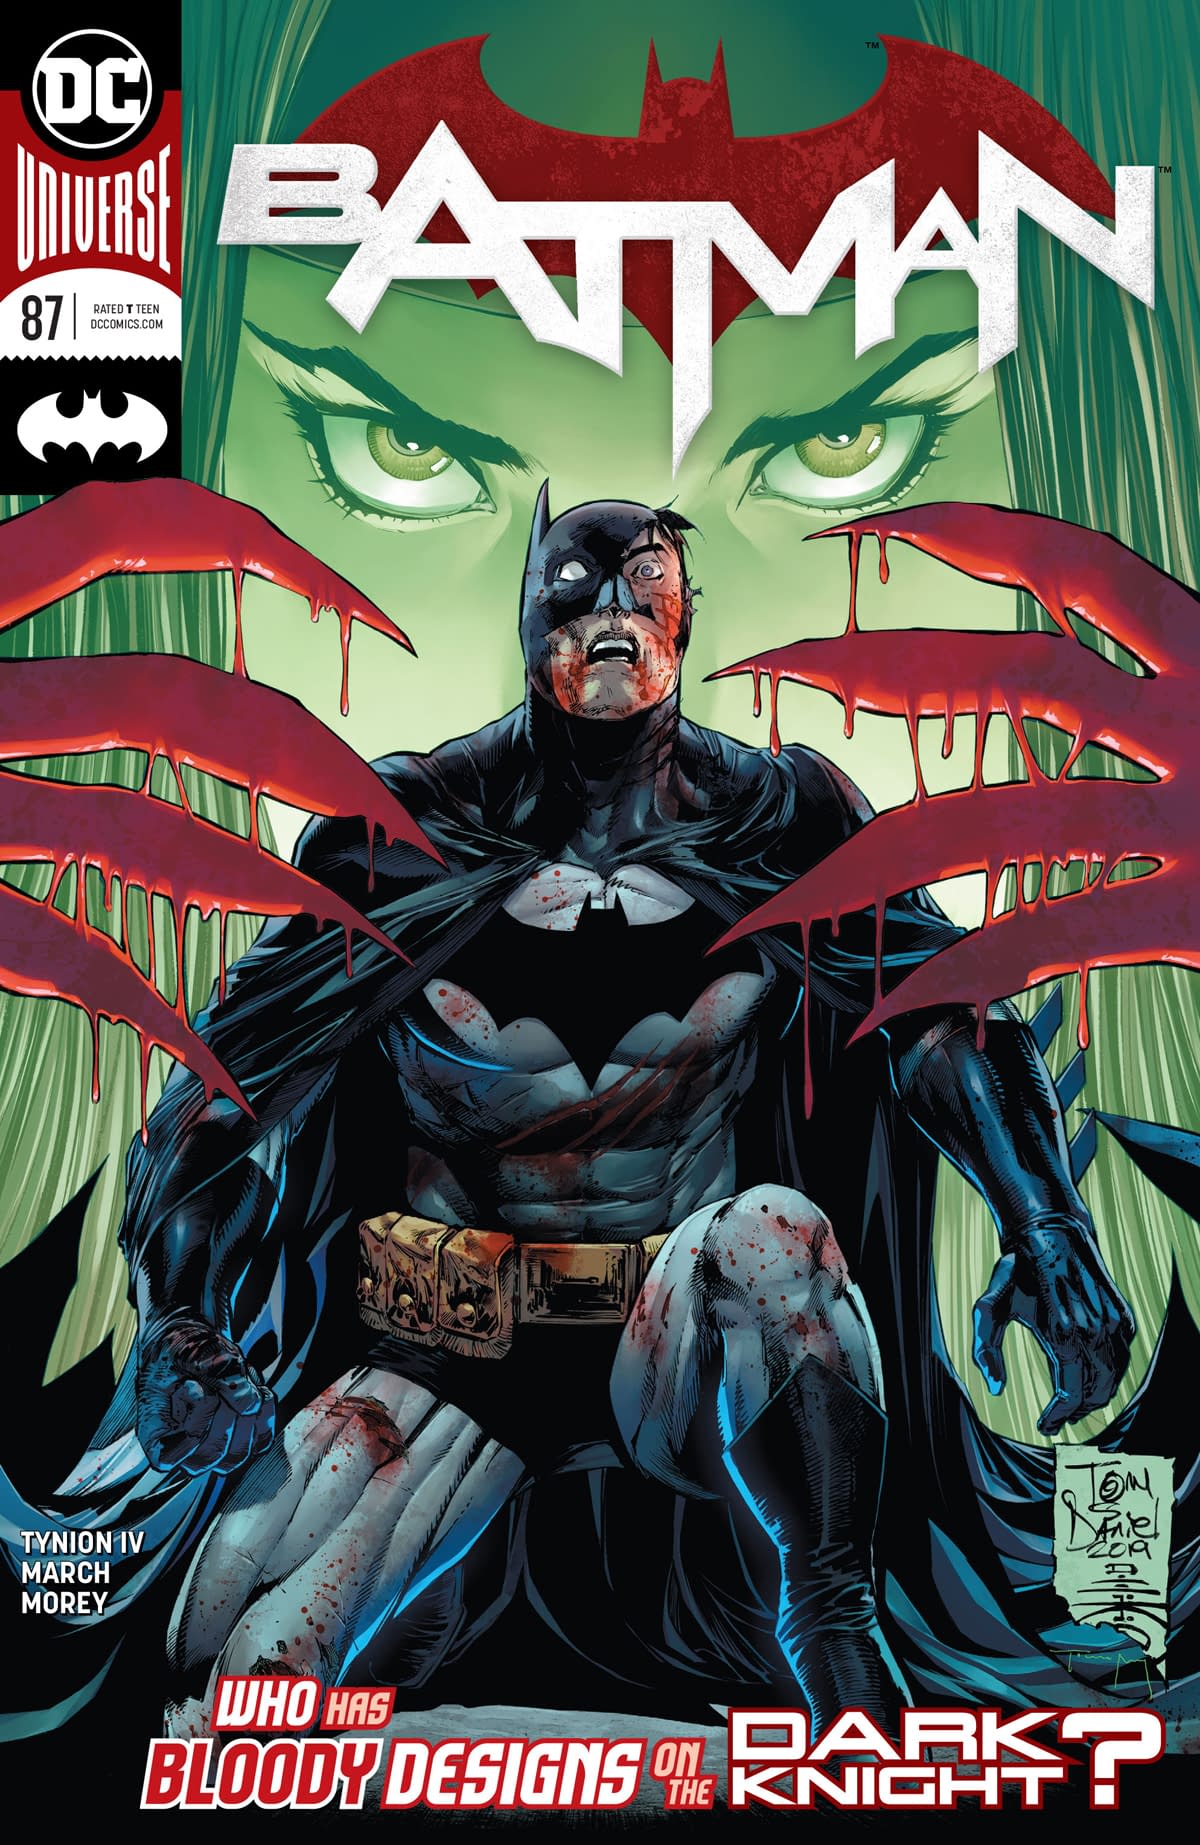 REVIEW: Batman #87 -- "A Thrill Ride With Breathtaking Moments"